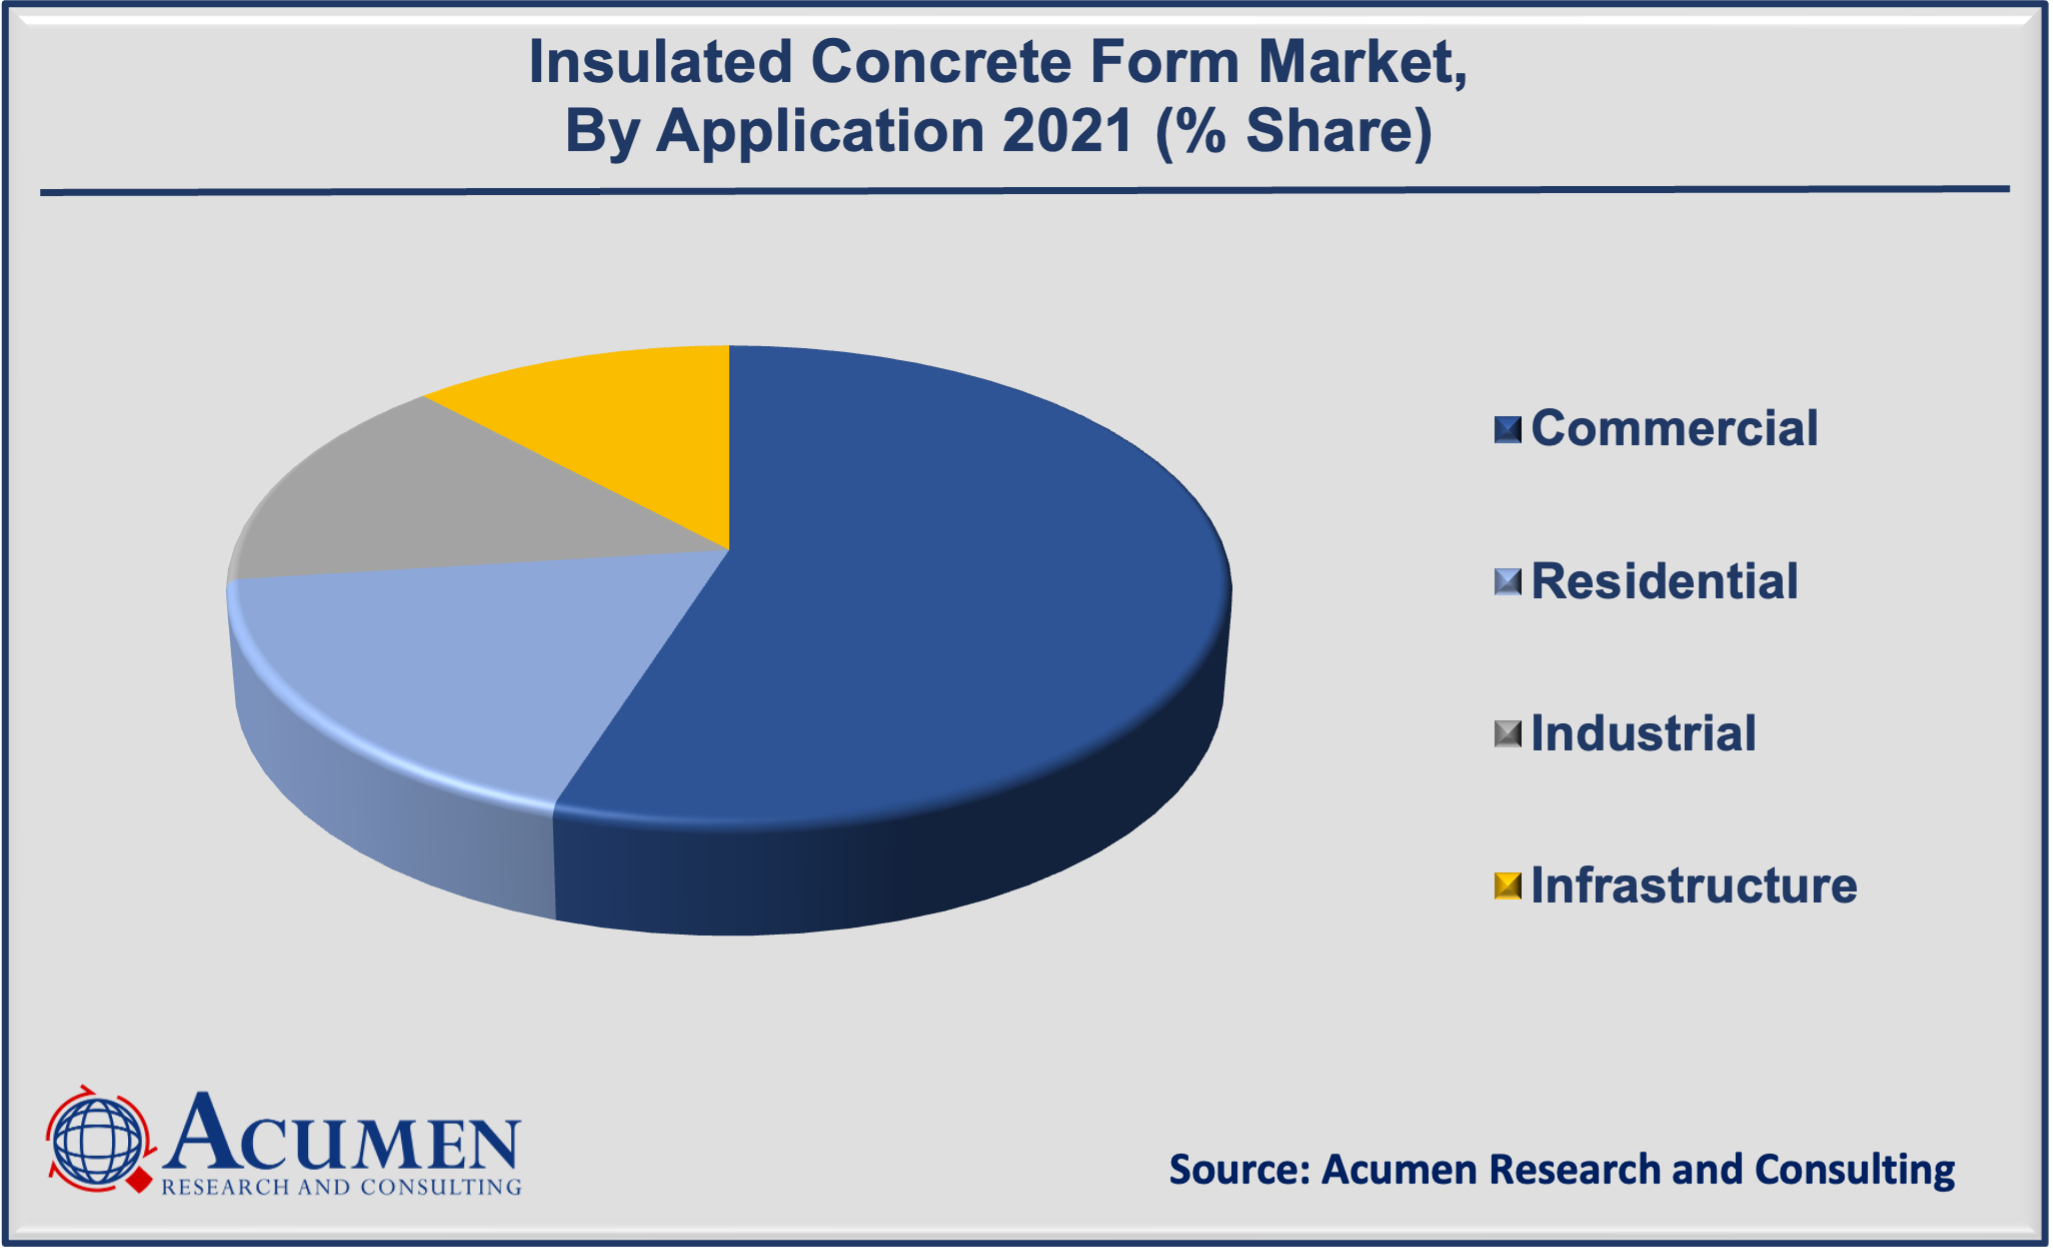 Insulated Concrete Form Market Size  is projected to reach the market value of USD 1,852 Million by 2030, growing at a CAGR of 5.9% during the forecast period from 2022 to 2030.